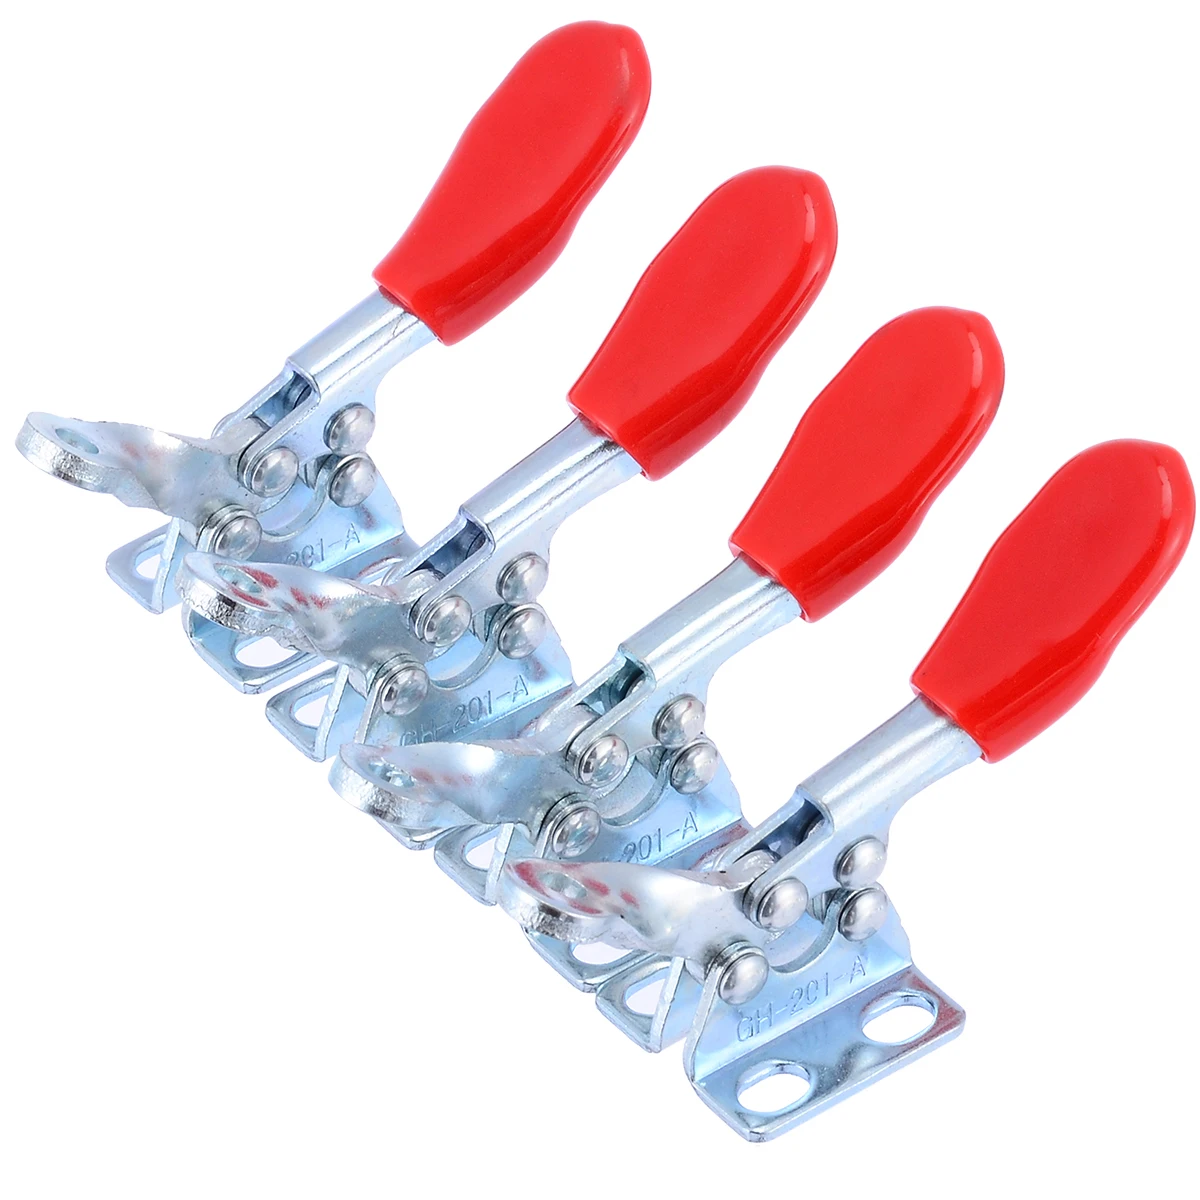 

GH-201A Horizontal Toggle Clamp Quick-Release 201 Toggle Clamps Set 27KG Hand Clip Tool Vertical Toggle Clamp Tools 4pcs